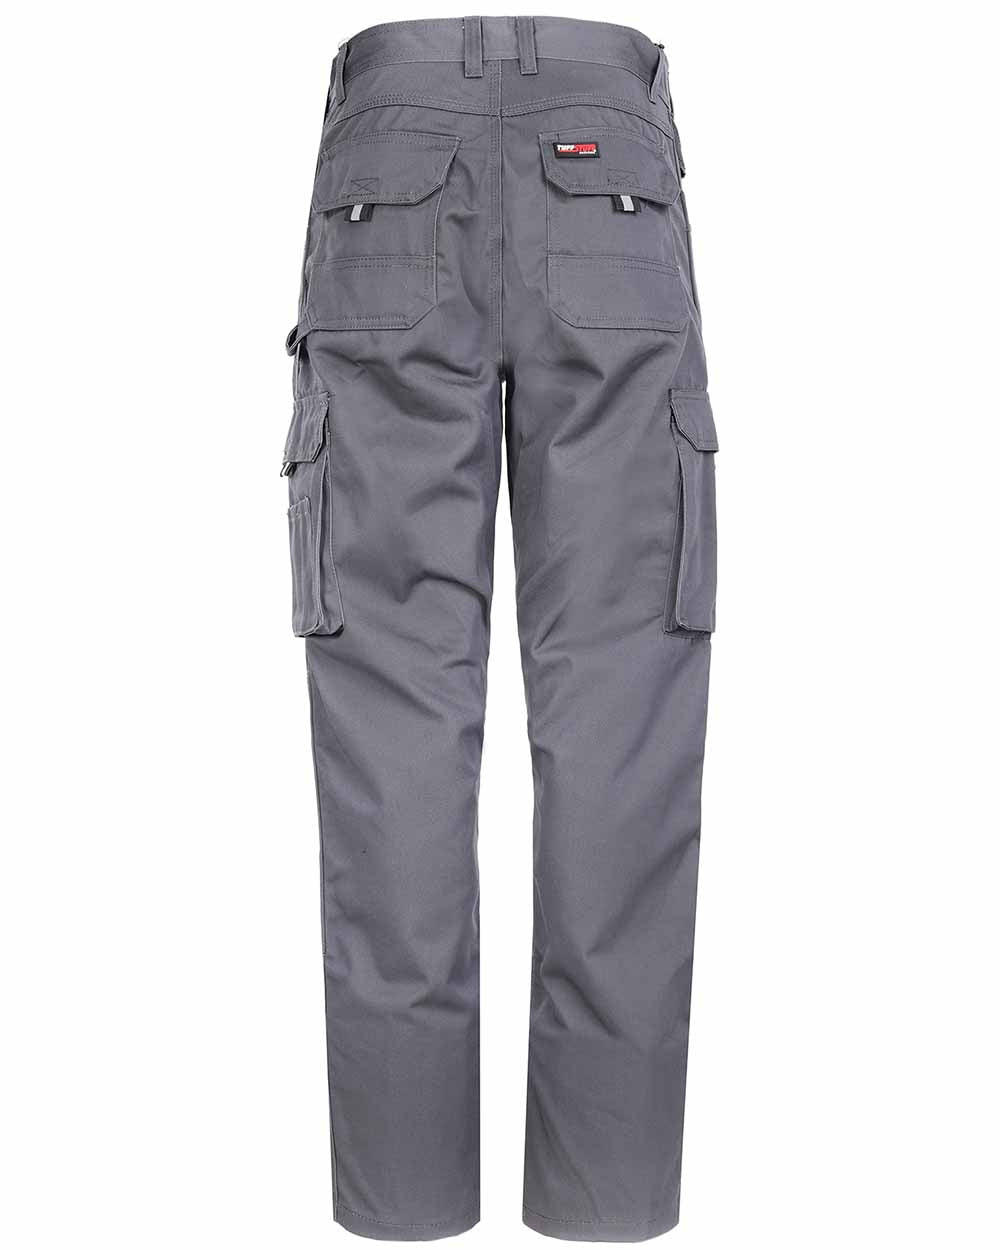 Back View TuffStuff Pro Work Trousers in Grey  